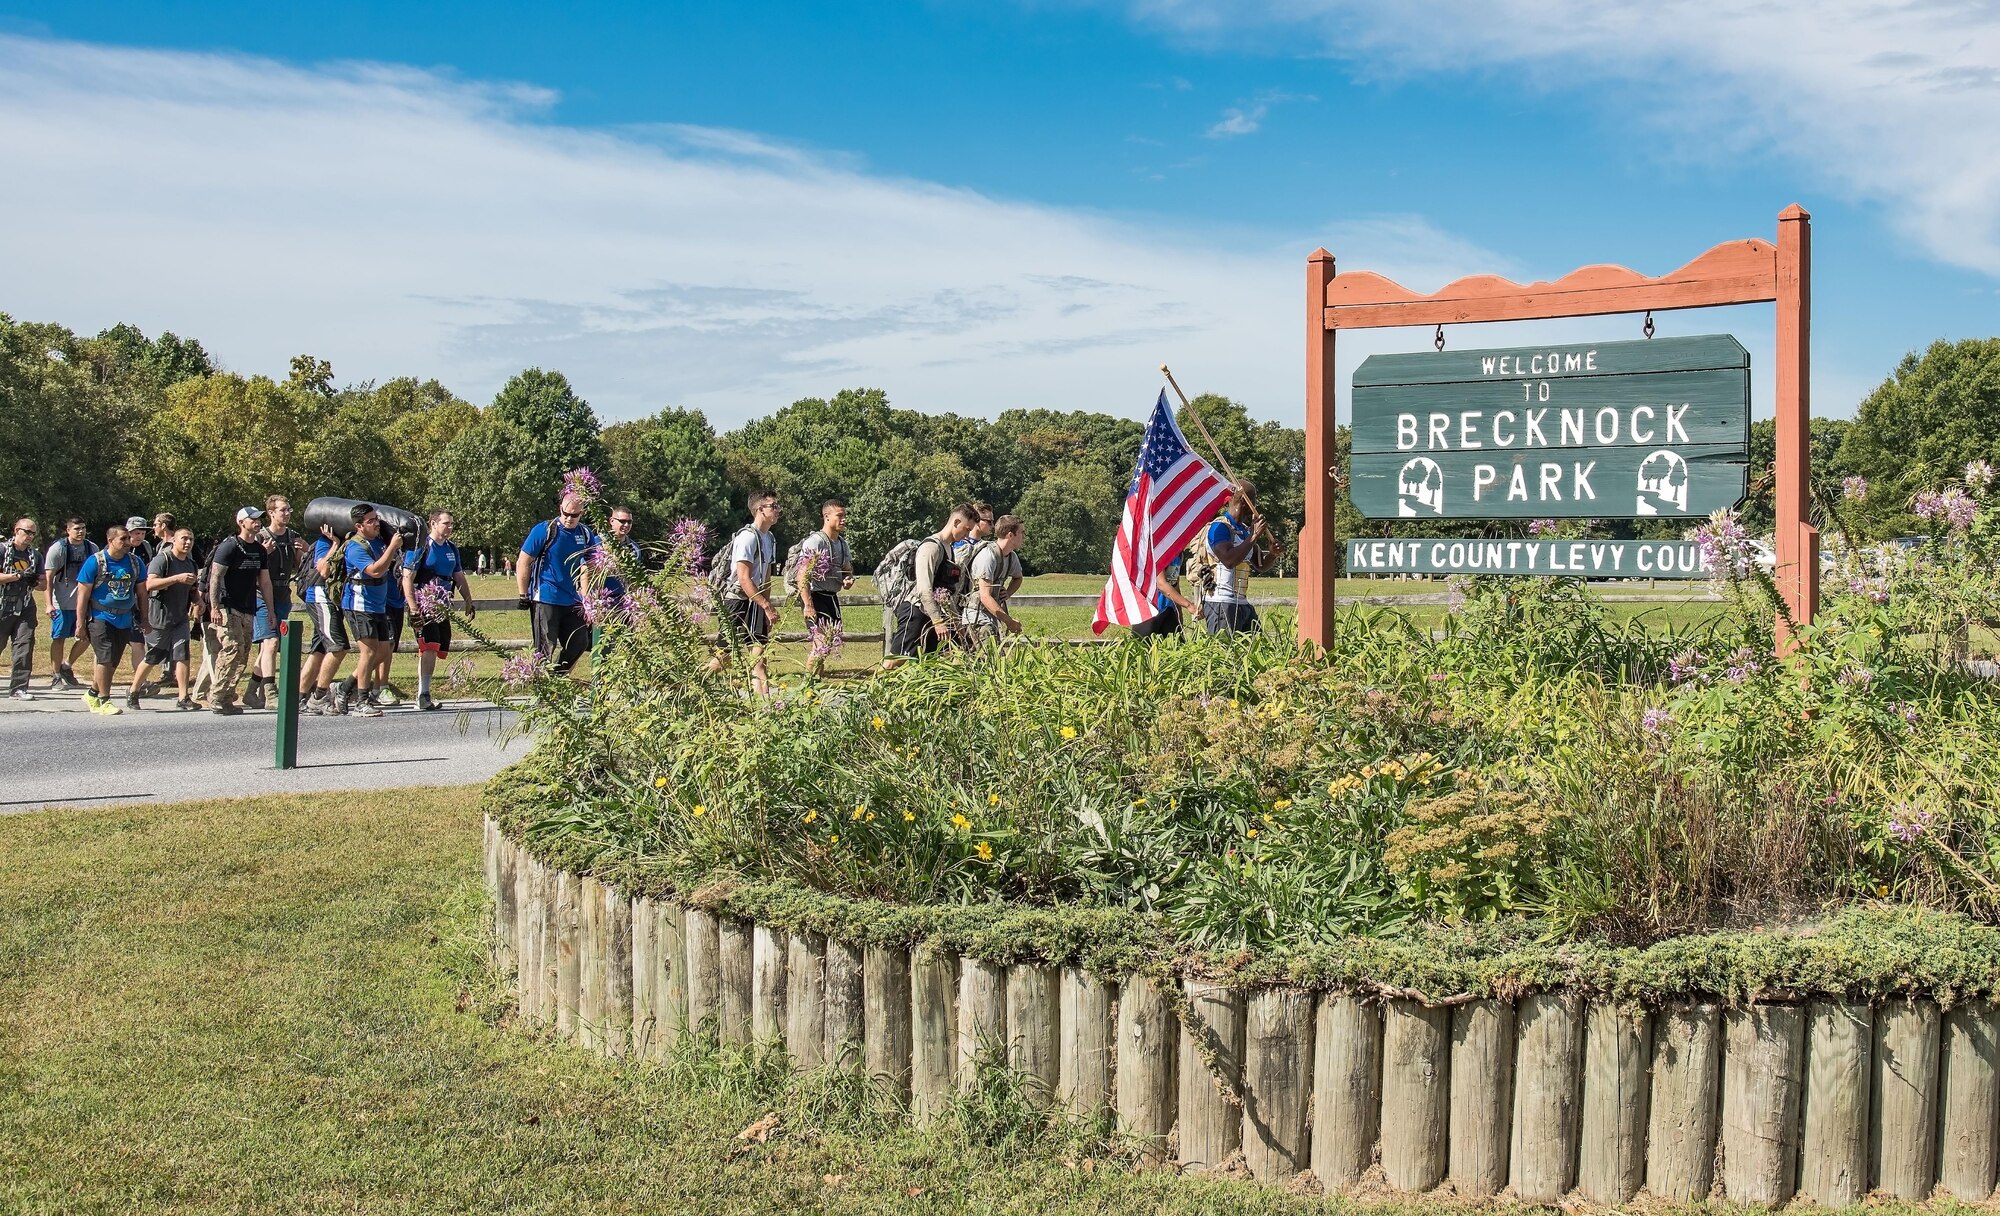 Participants in the 2017 GORUCK Light Challenge begin the first of three laps on the hiking trail Oct. 6, 2017, at Brecknock Park in Camden, Del. The hike was the last challenge of the day. (U.S. Air Force photo by Roland Balik)